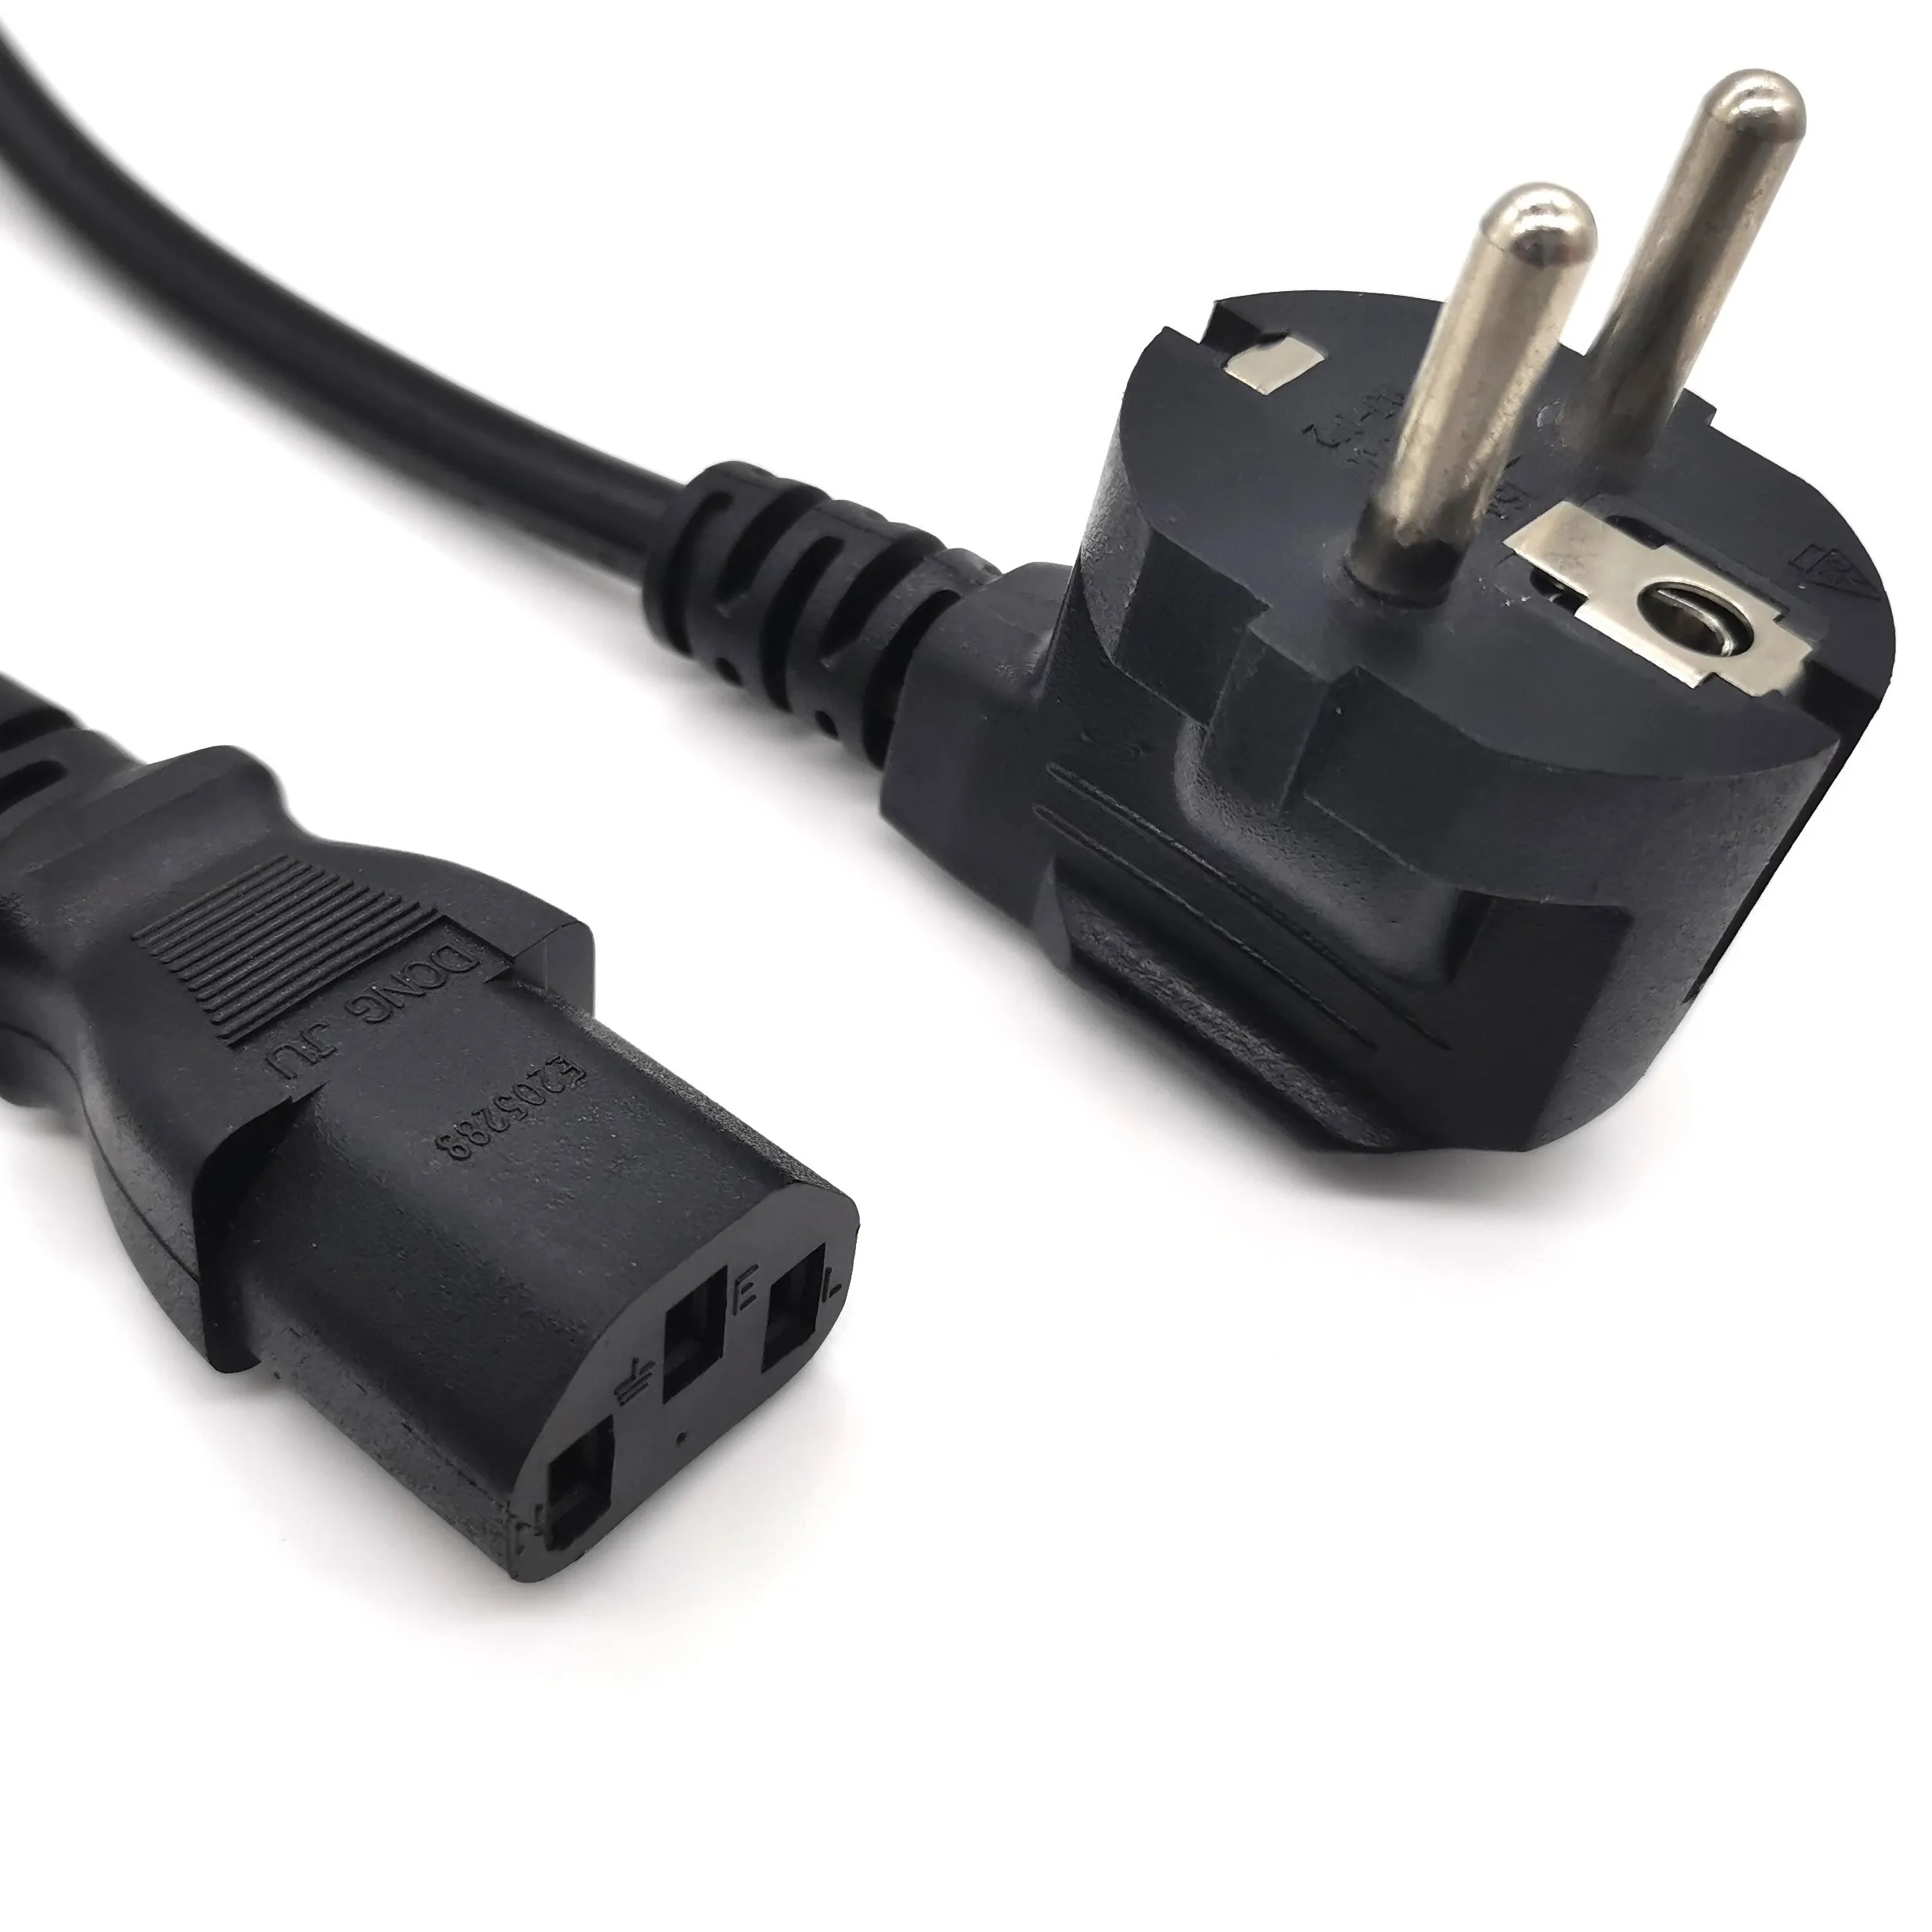 Free Sample 3 Pin AC Cable with EU C13 Plug Power Cord for PC Desktop Laptop Computer